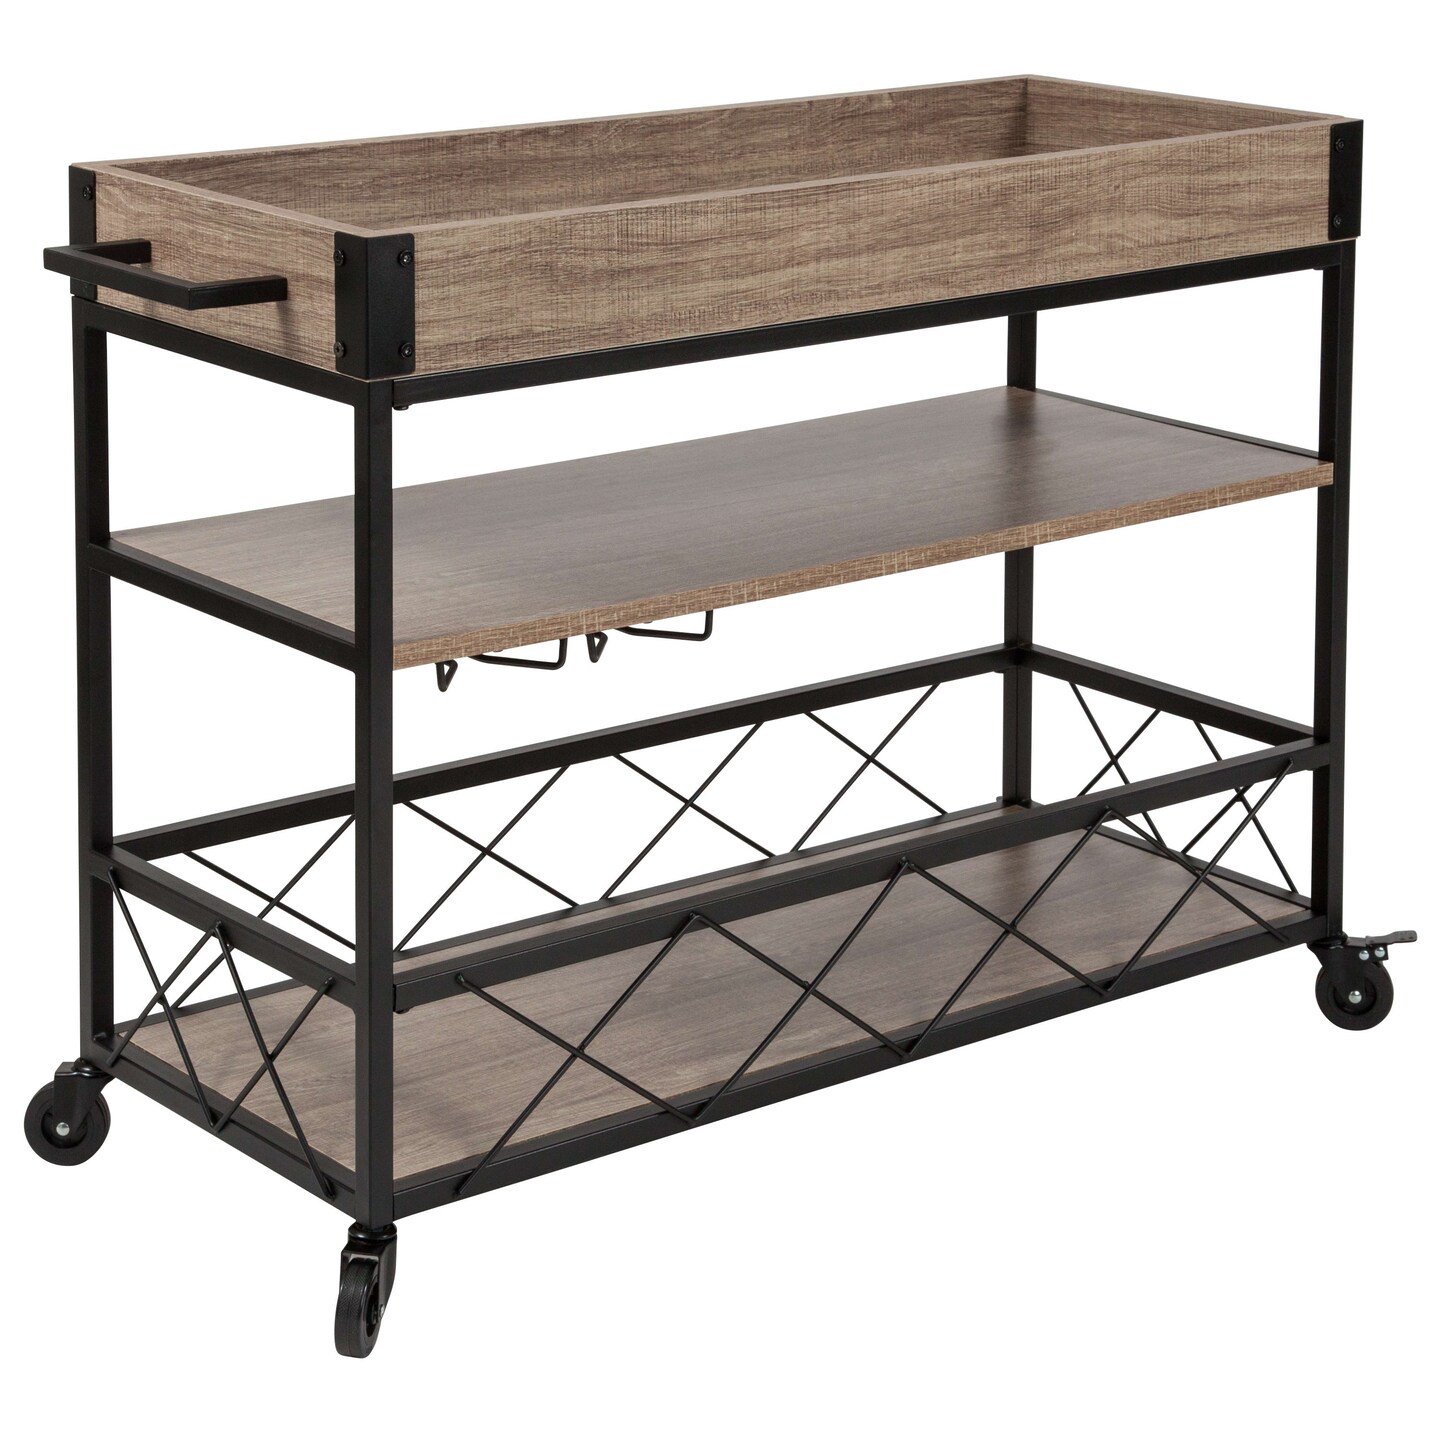 Merrick Lane Brookville Rolling Kitchen Serving and Bar Cart with Shelves and Wine Glass Holders